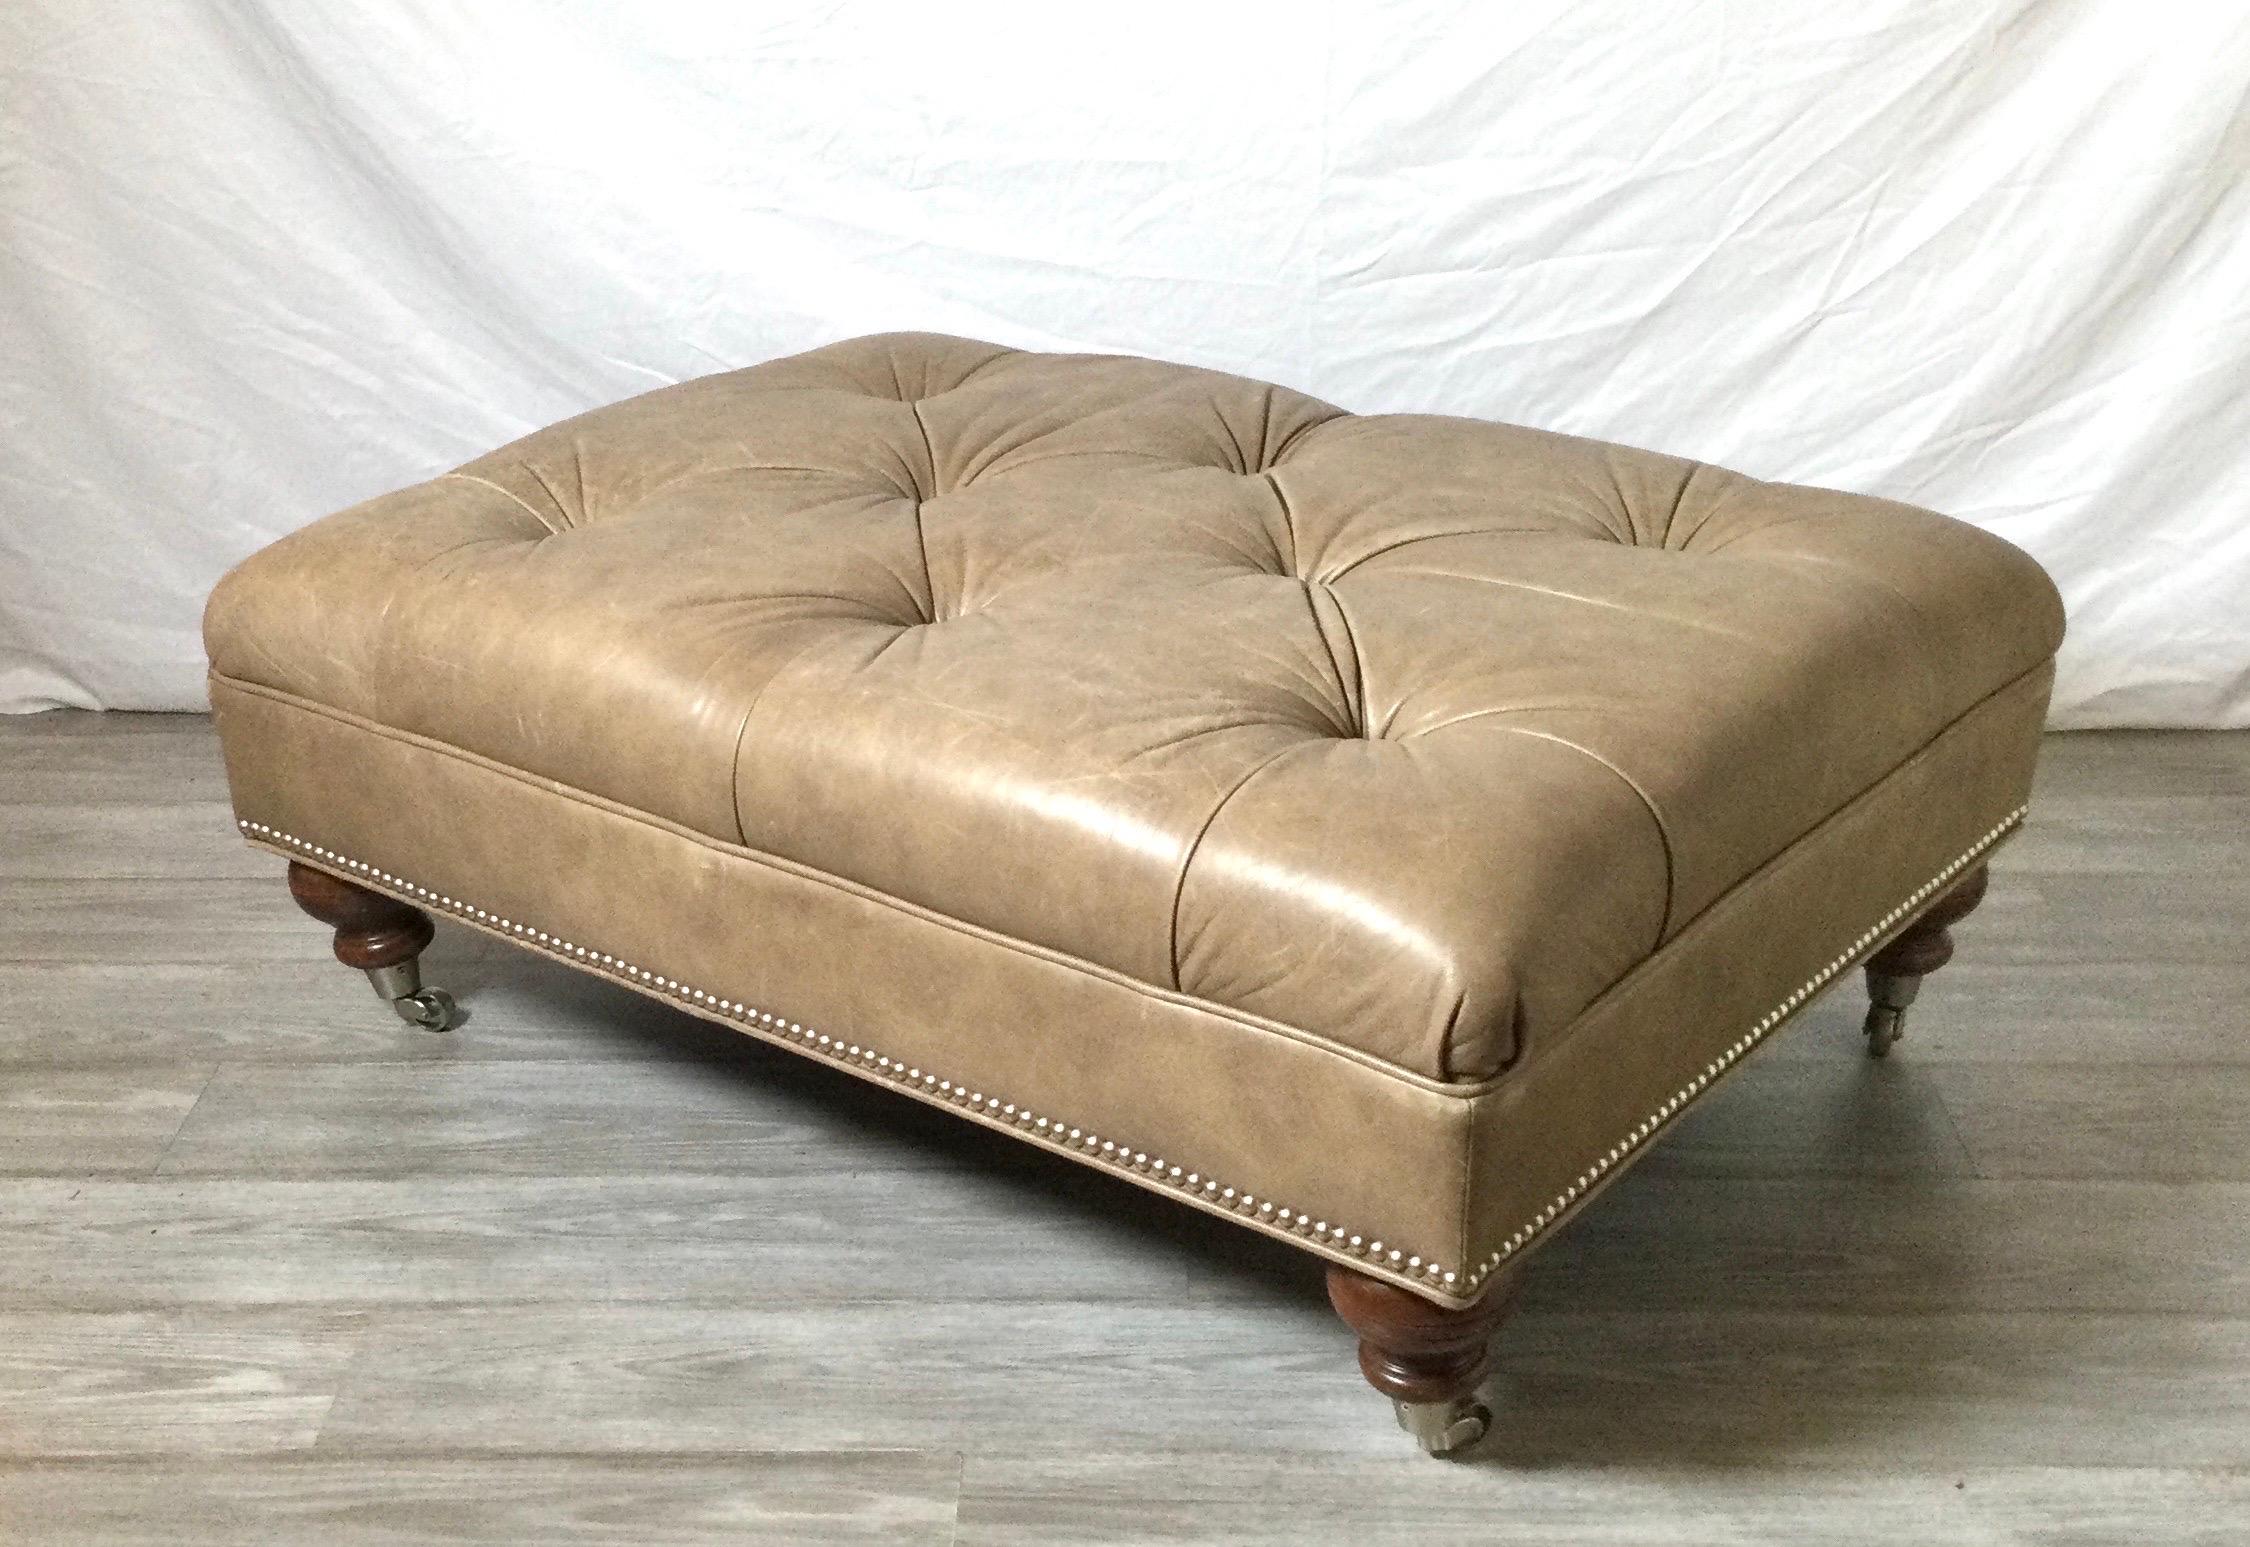 American Large Tufted Leather Ottoman Coffee Table